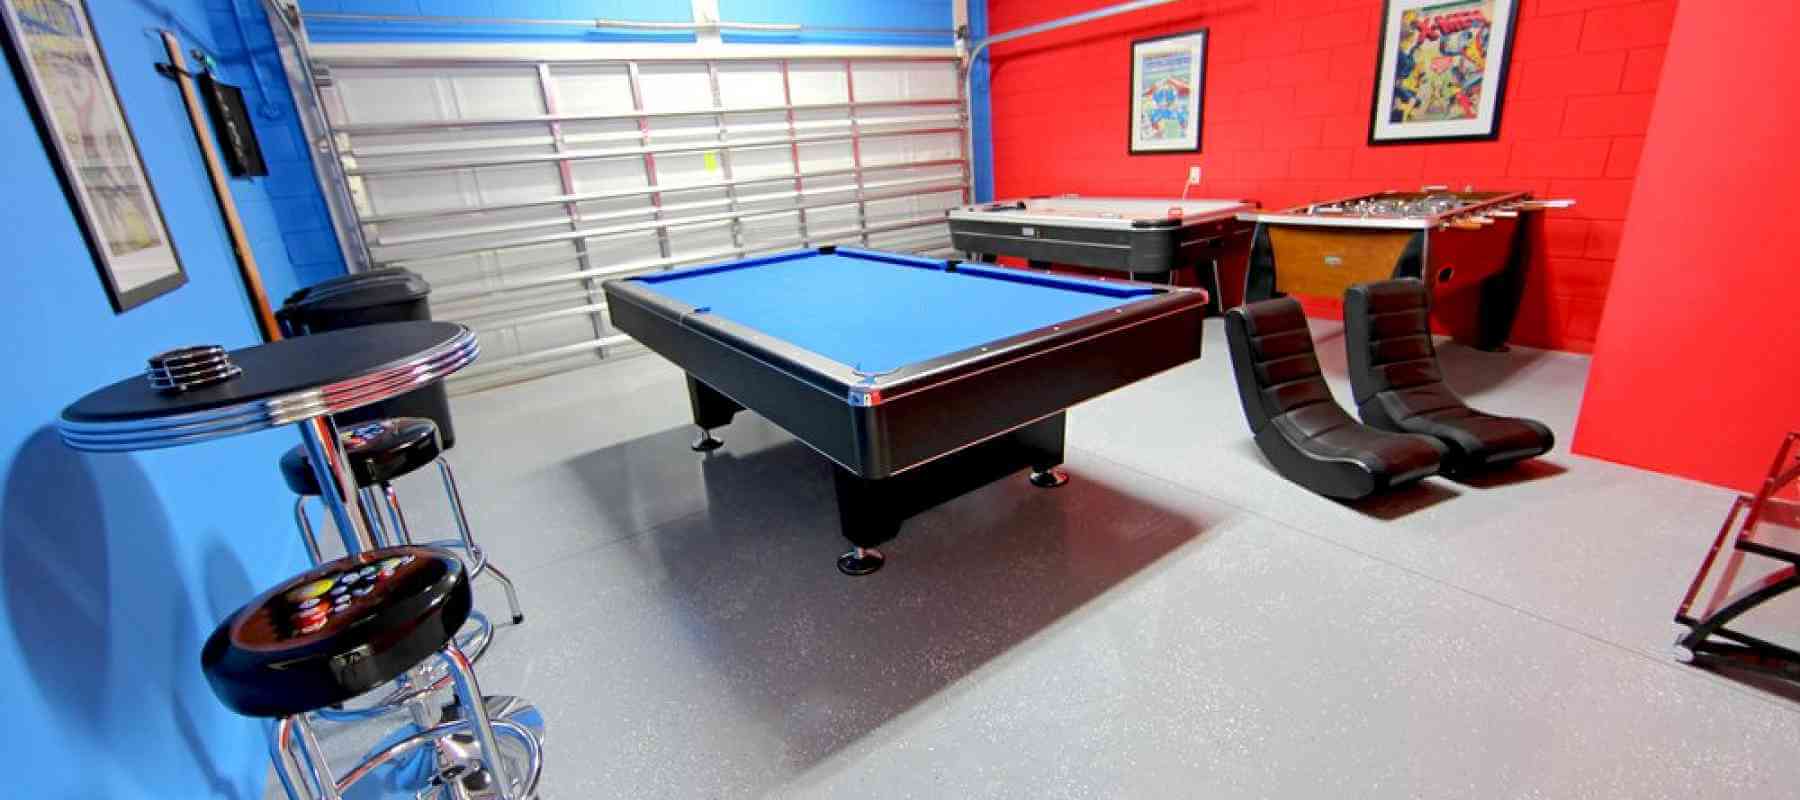 How To Turn Your Garage Into A Game Room Cool Ideas For Making It Happen